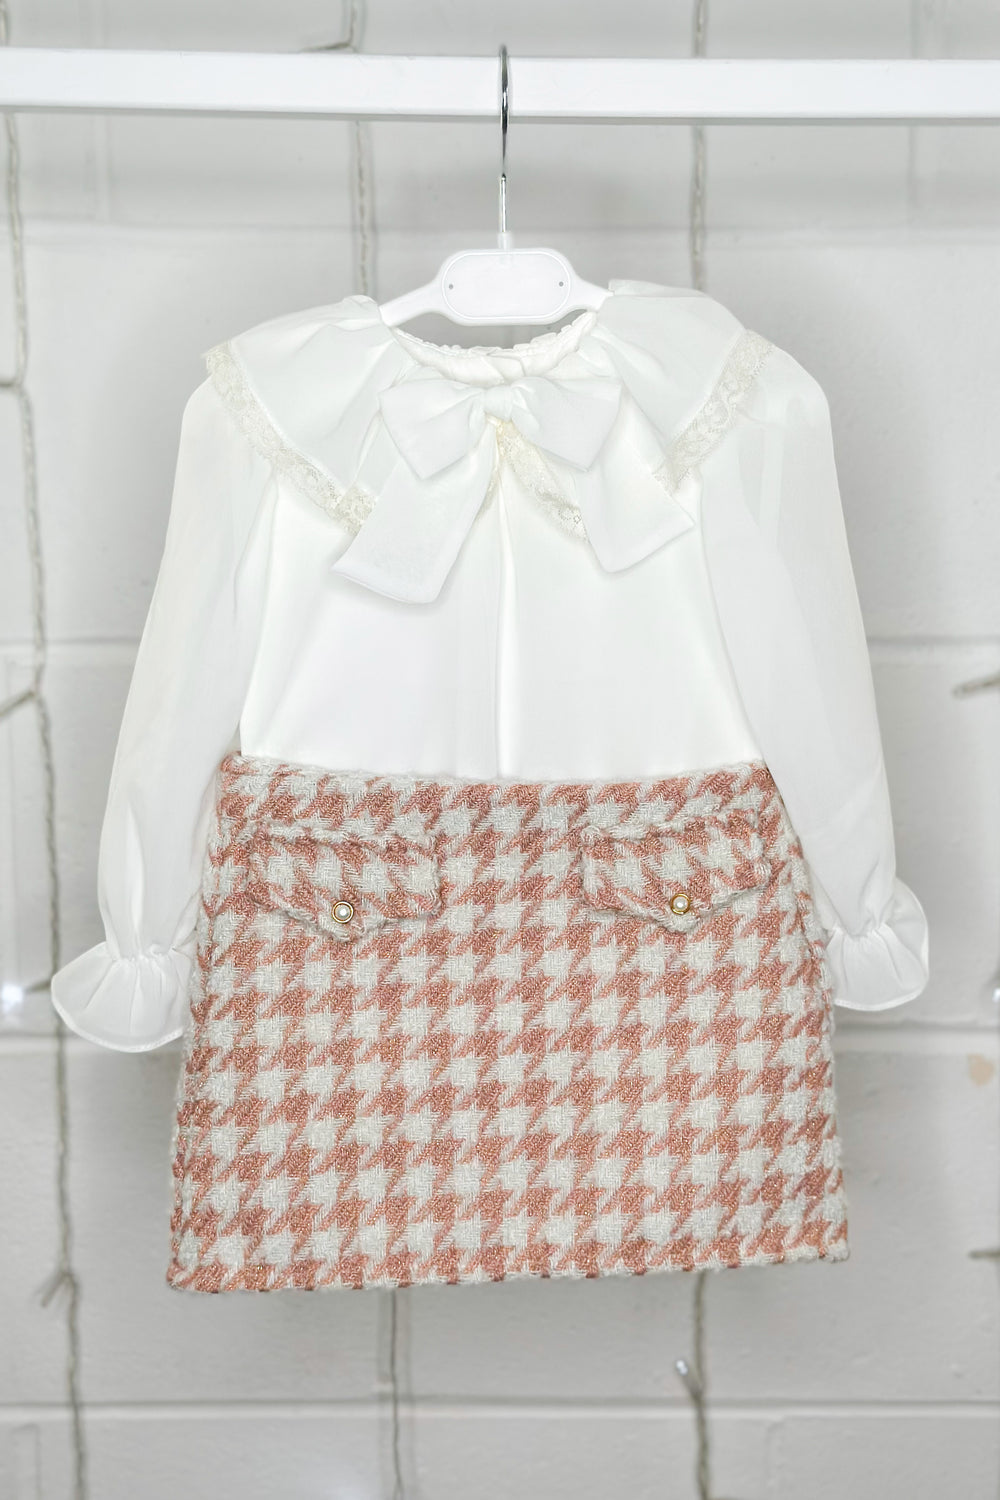 Fofettes "Peggy" Blouse & Pink Houndstooth Knit Skirt | Millie and John